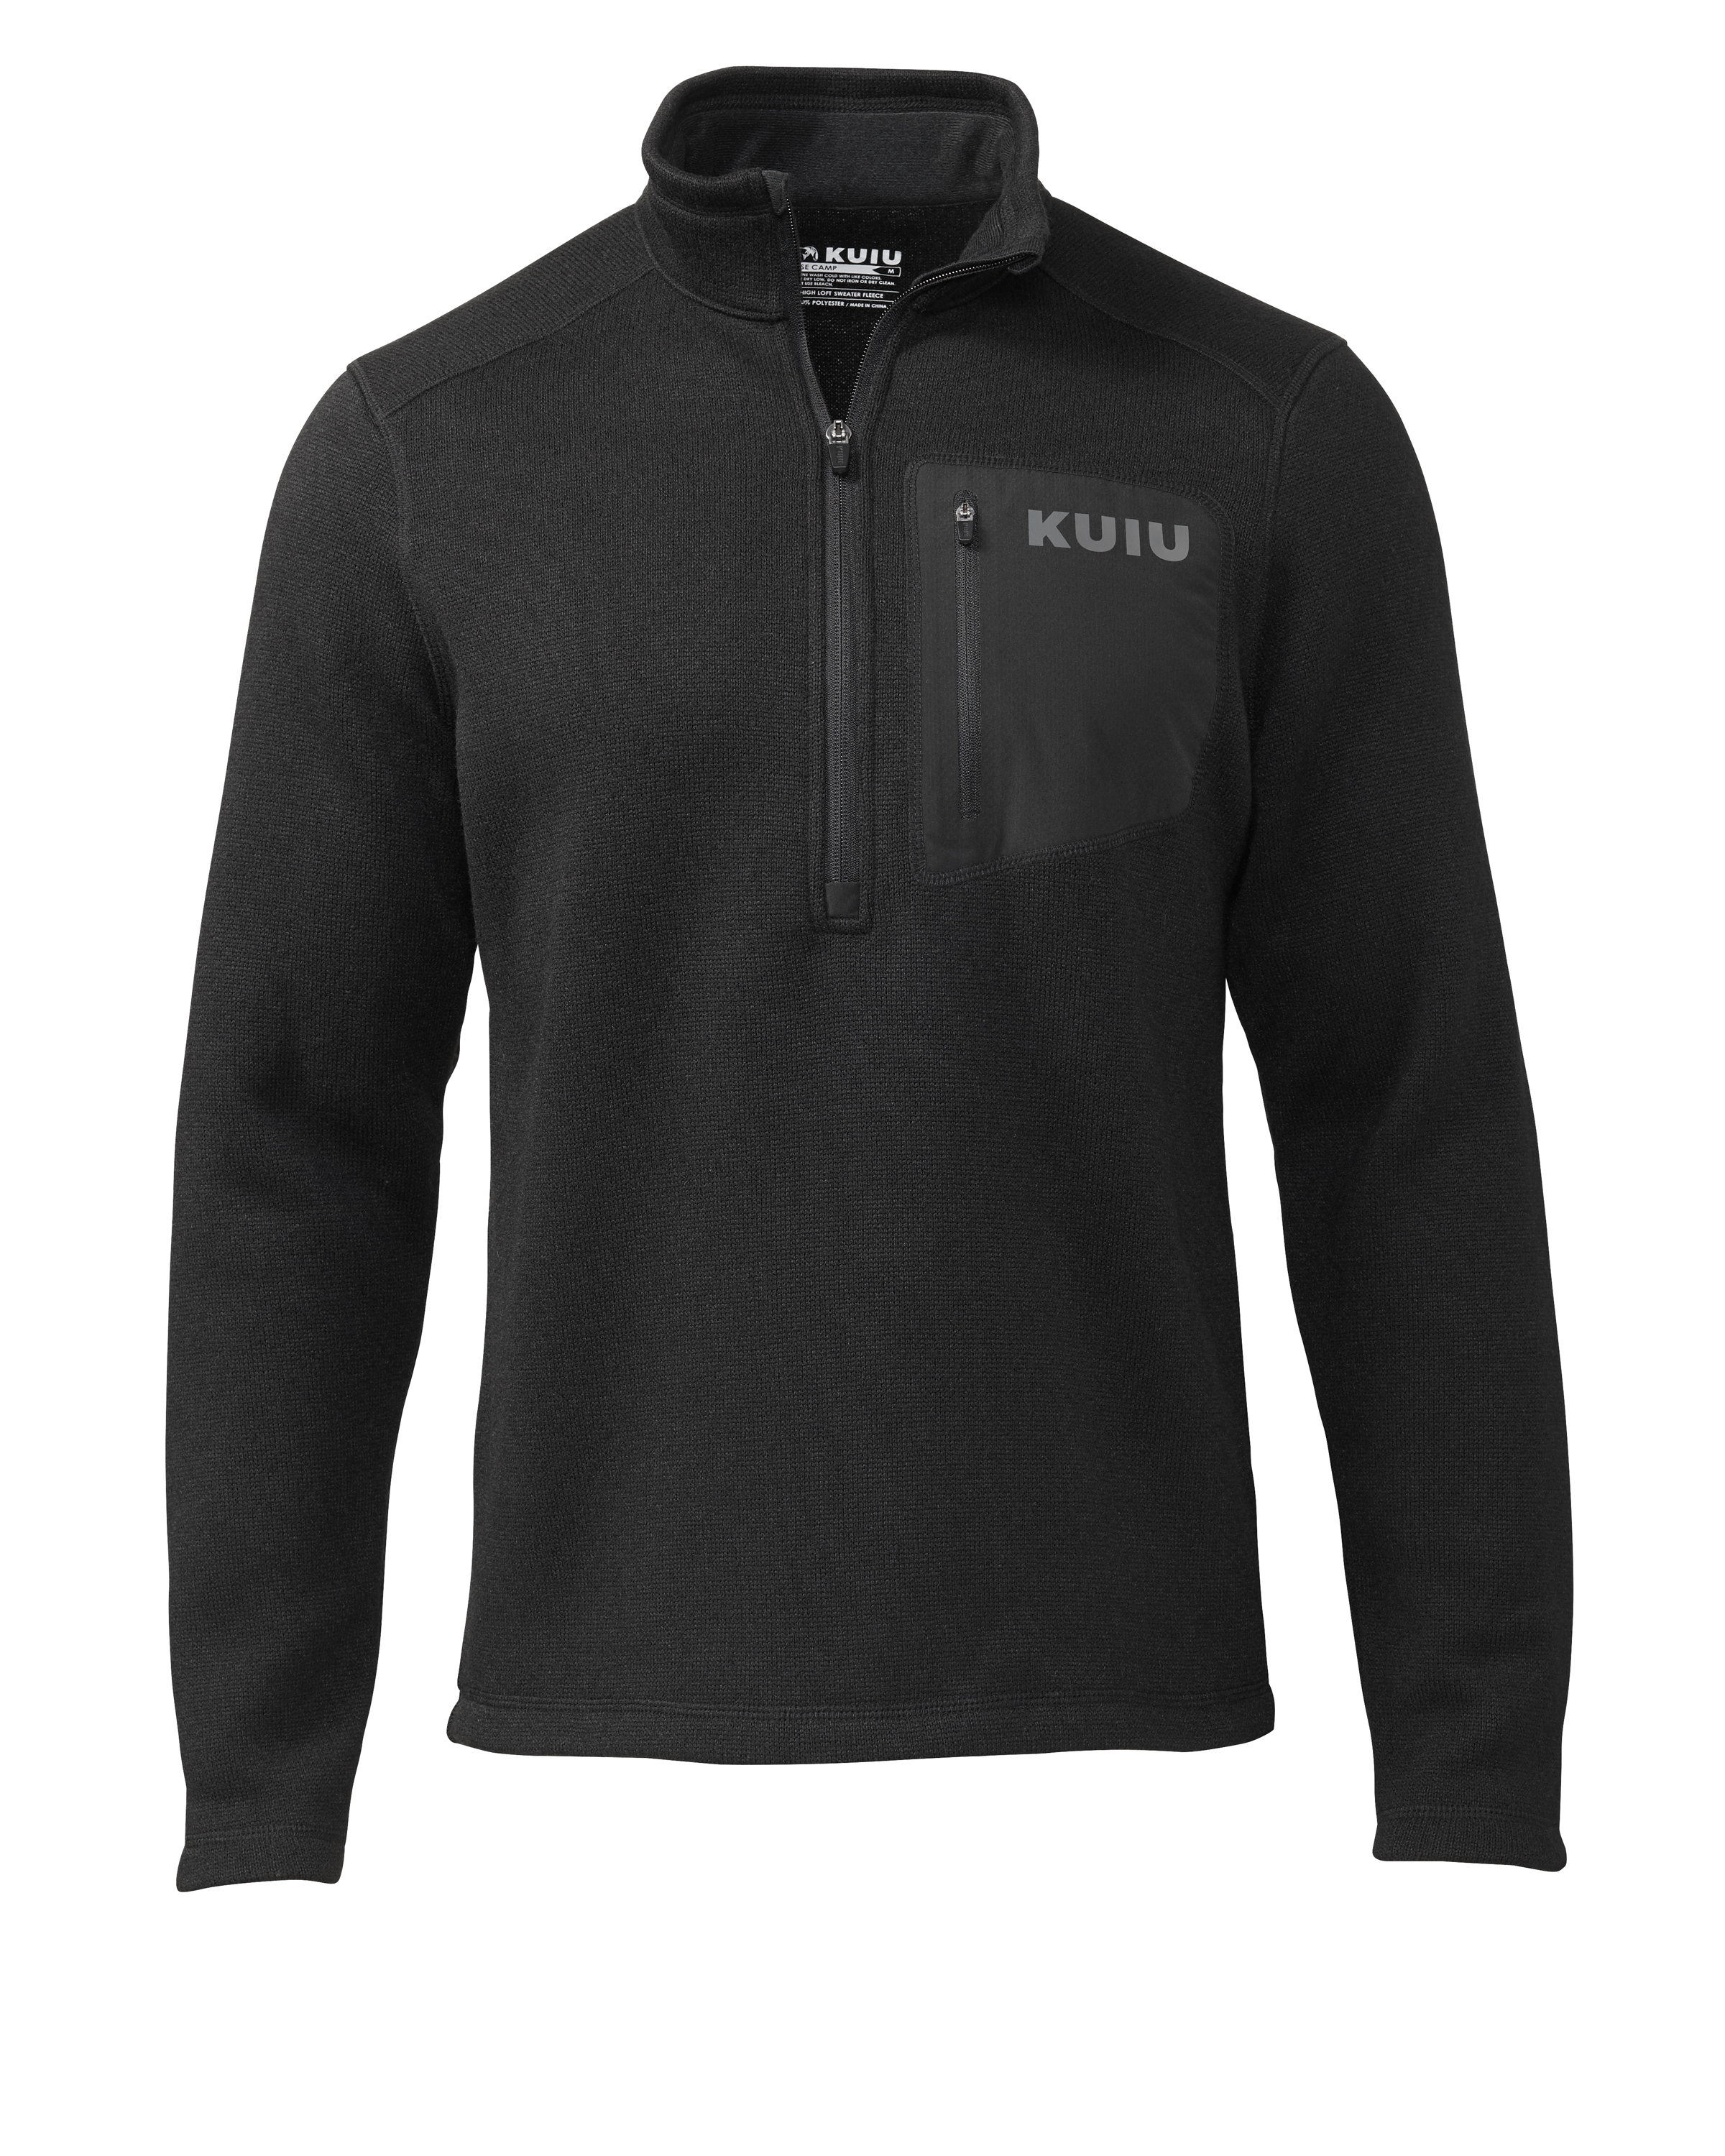 KUIU Base Camp Pullover Sweater in Black | Size XL